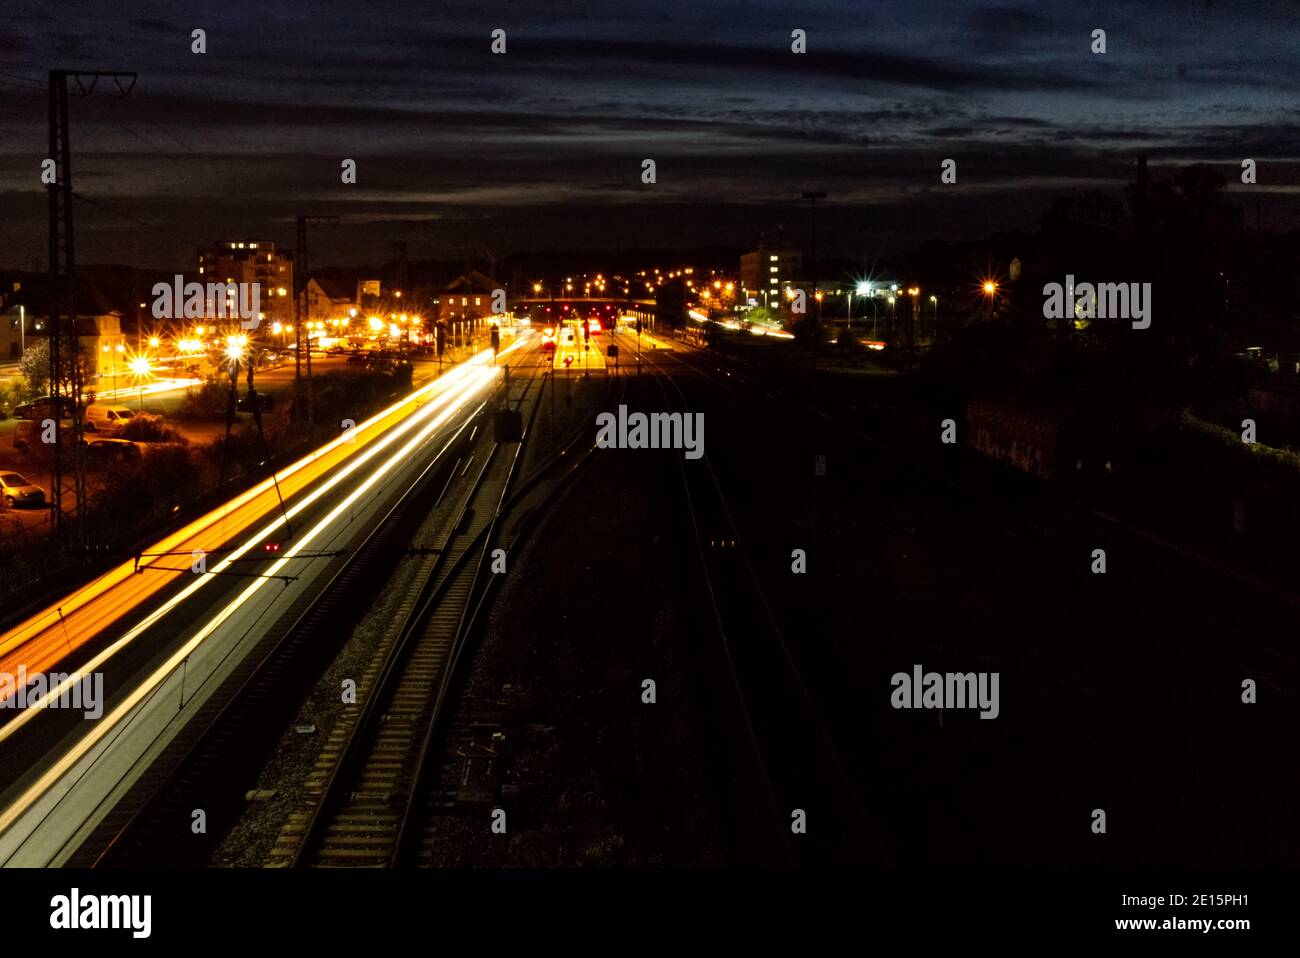 Arriving Train in the night Stock Photo